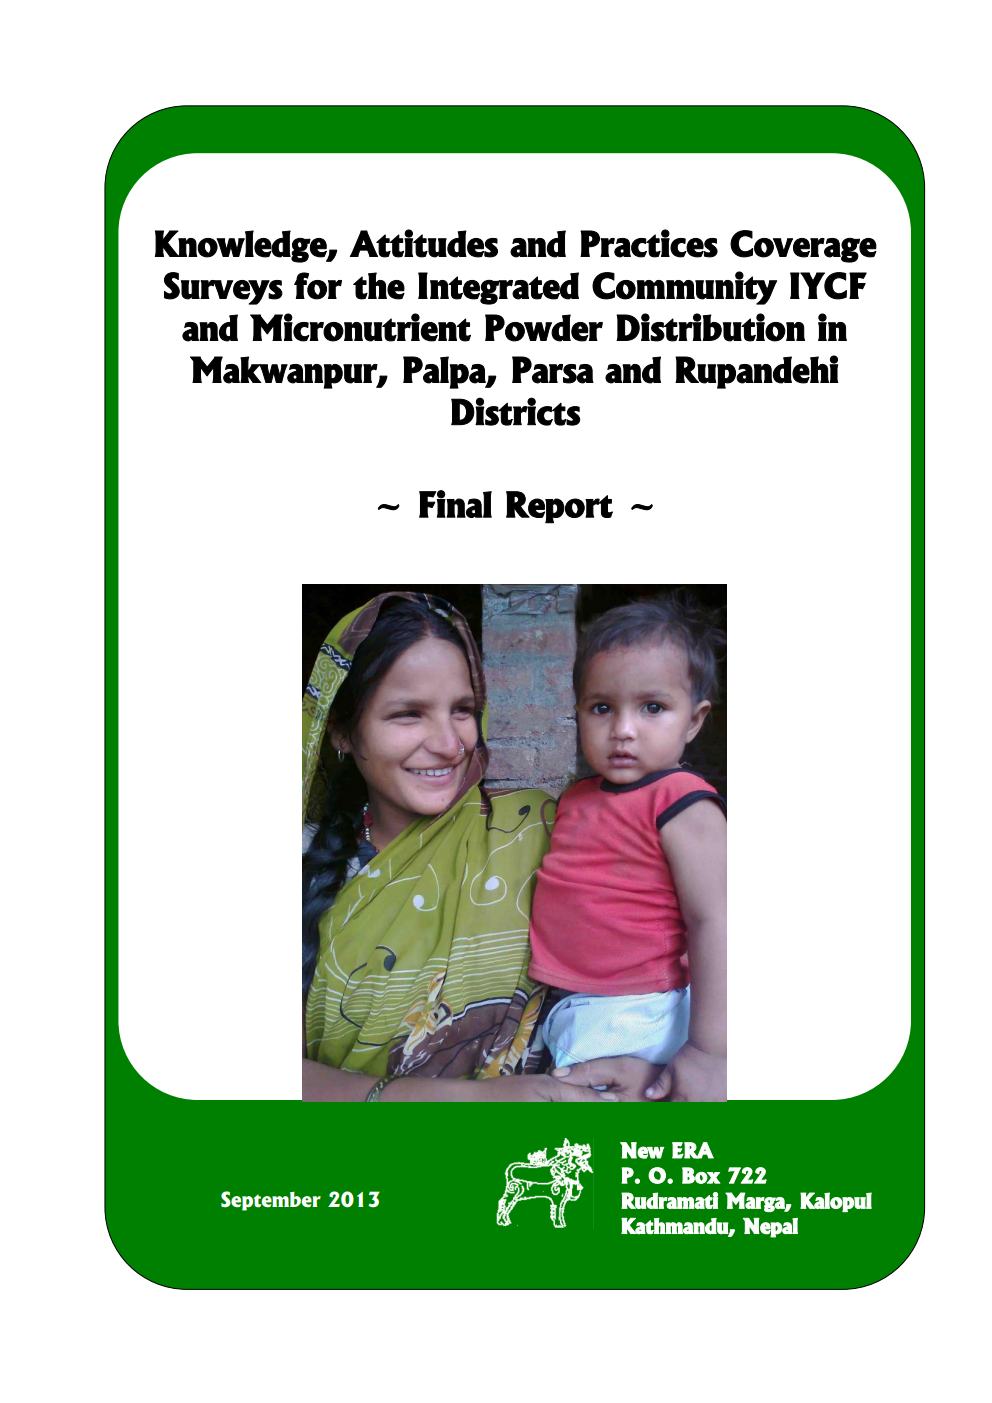 Knowledge, Attitudes and Practices Coverage Survey for the Integrated Infant and Young Child Feeding and Micronutrient Powders Distribution in Makwanpur, Palpa, Parsa and Rupandehi Districts